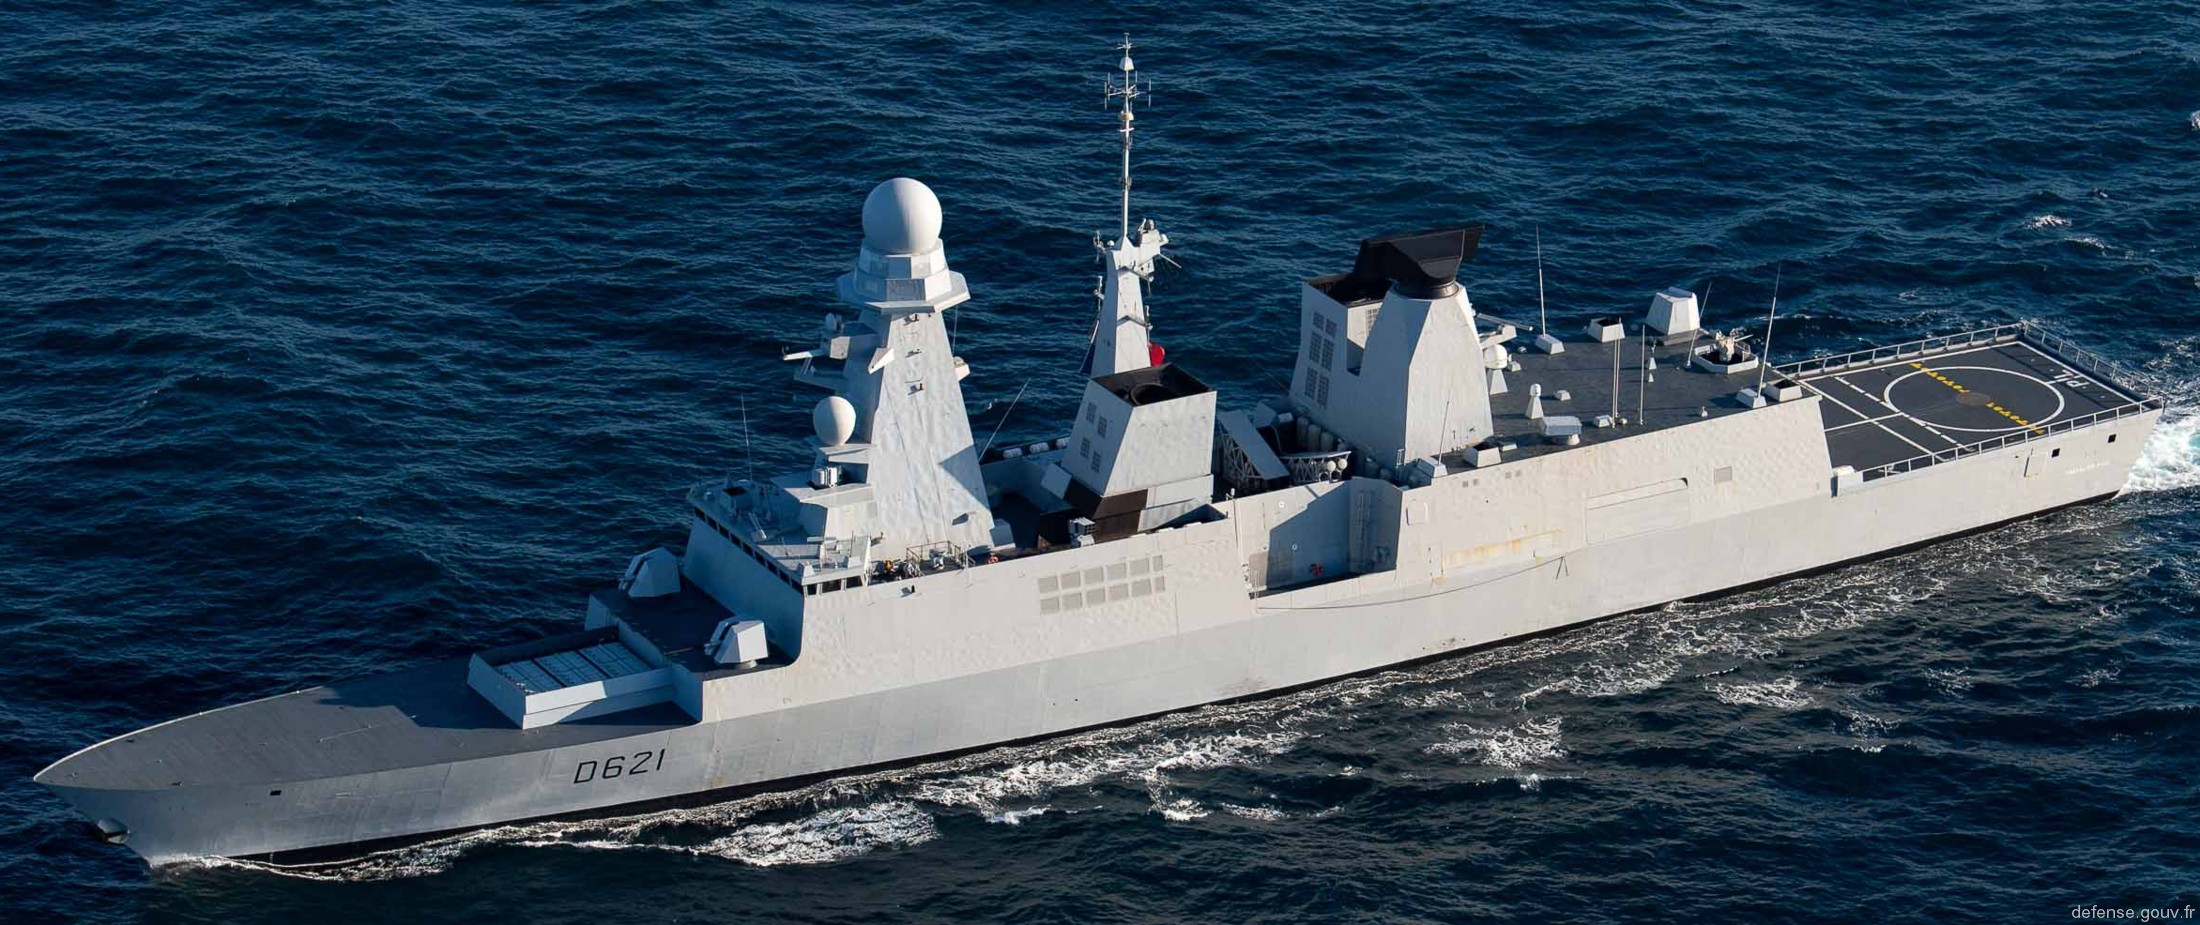 d-621 fs chevalier paul forbin horizon class guided missile frigate anti-air-warfare aaw ffgh french navy marine nationale 25